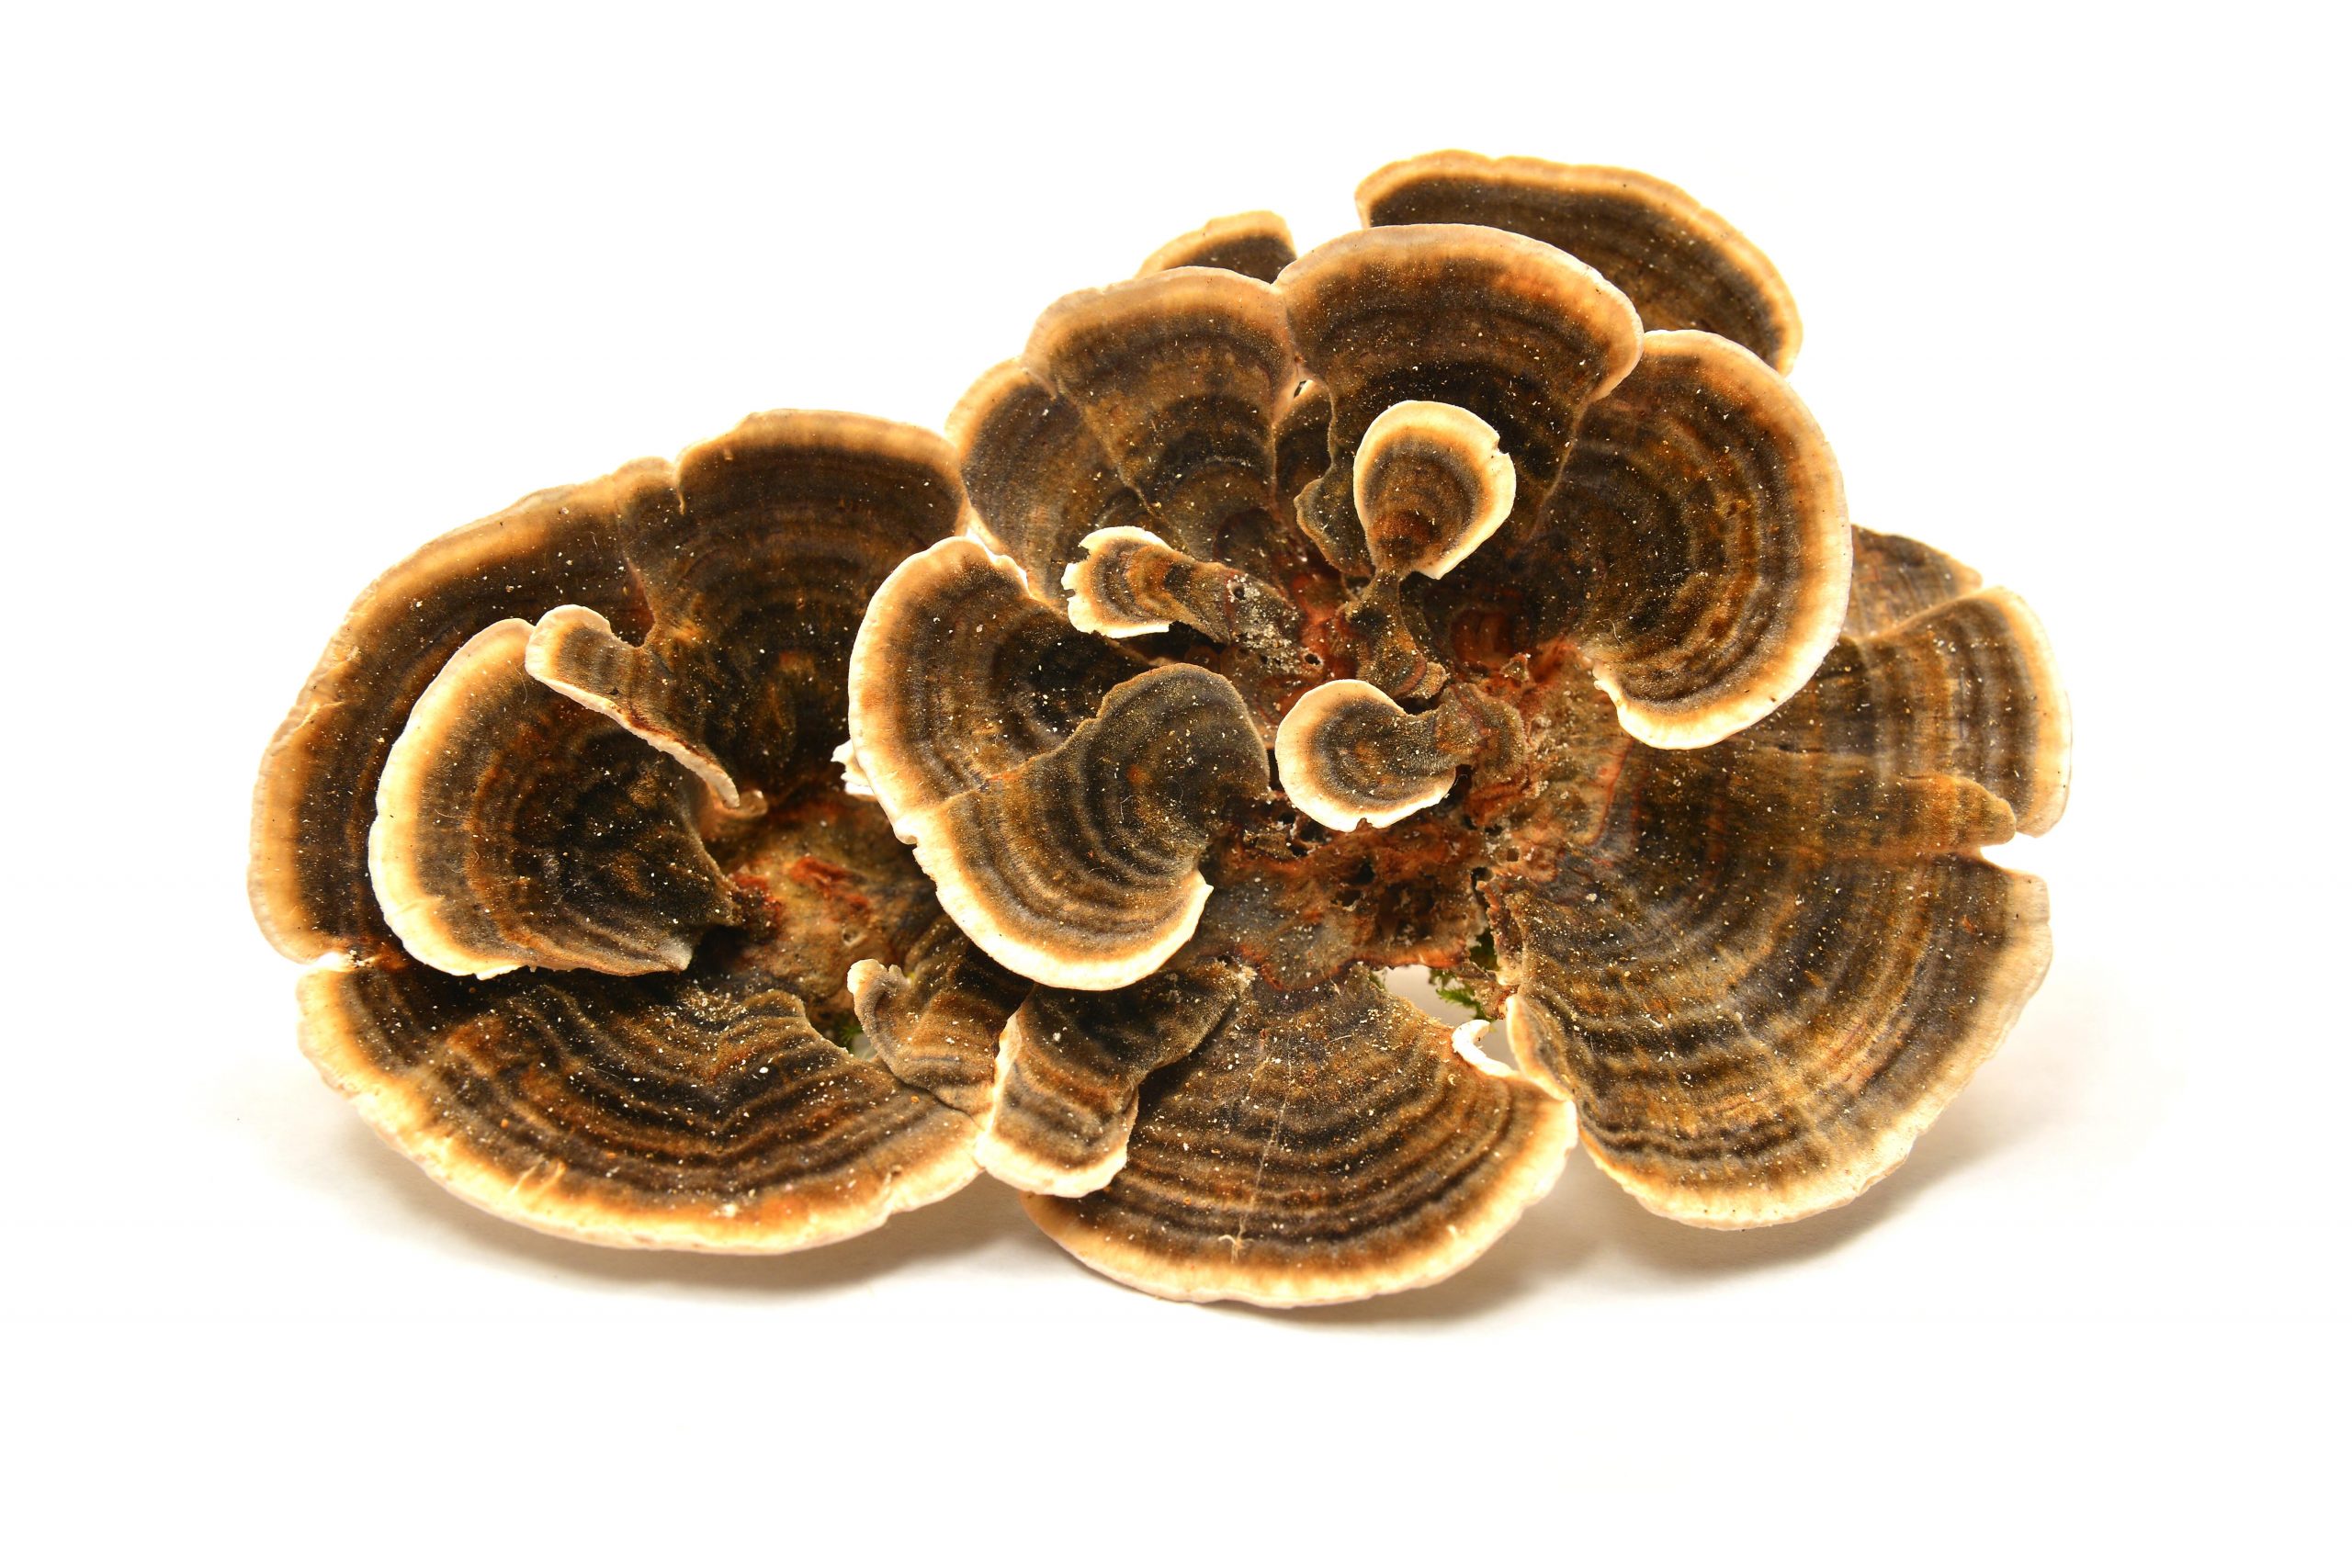 Comprehensive Guide on the Benefits of Turkey Tail Functional Mushrooms